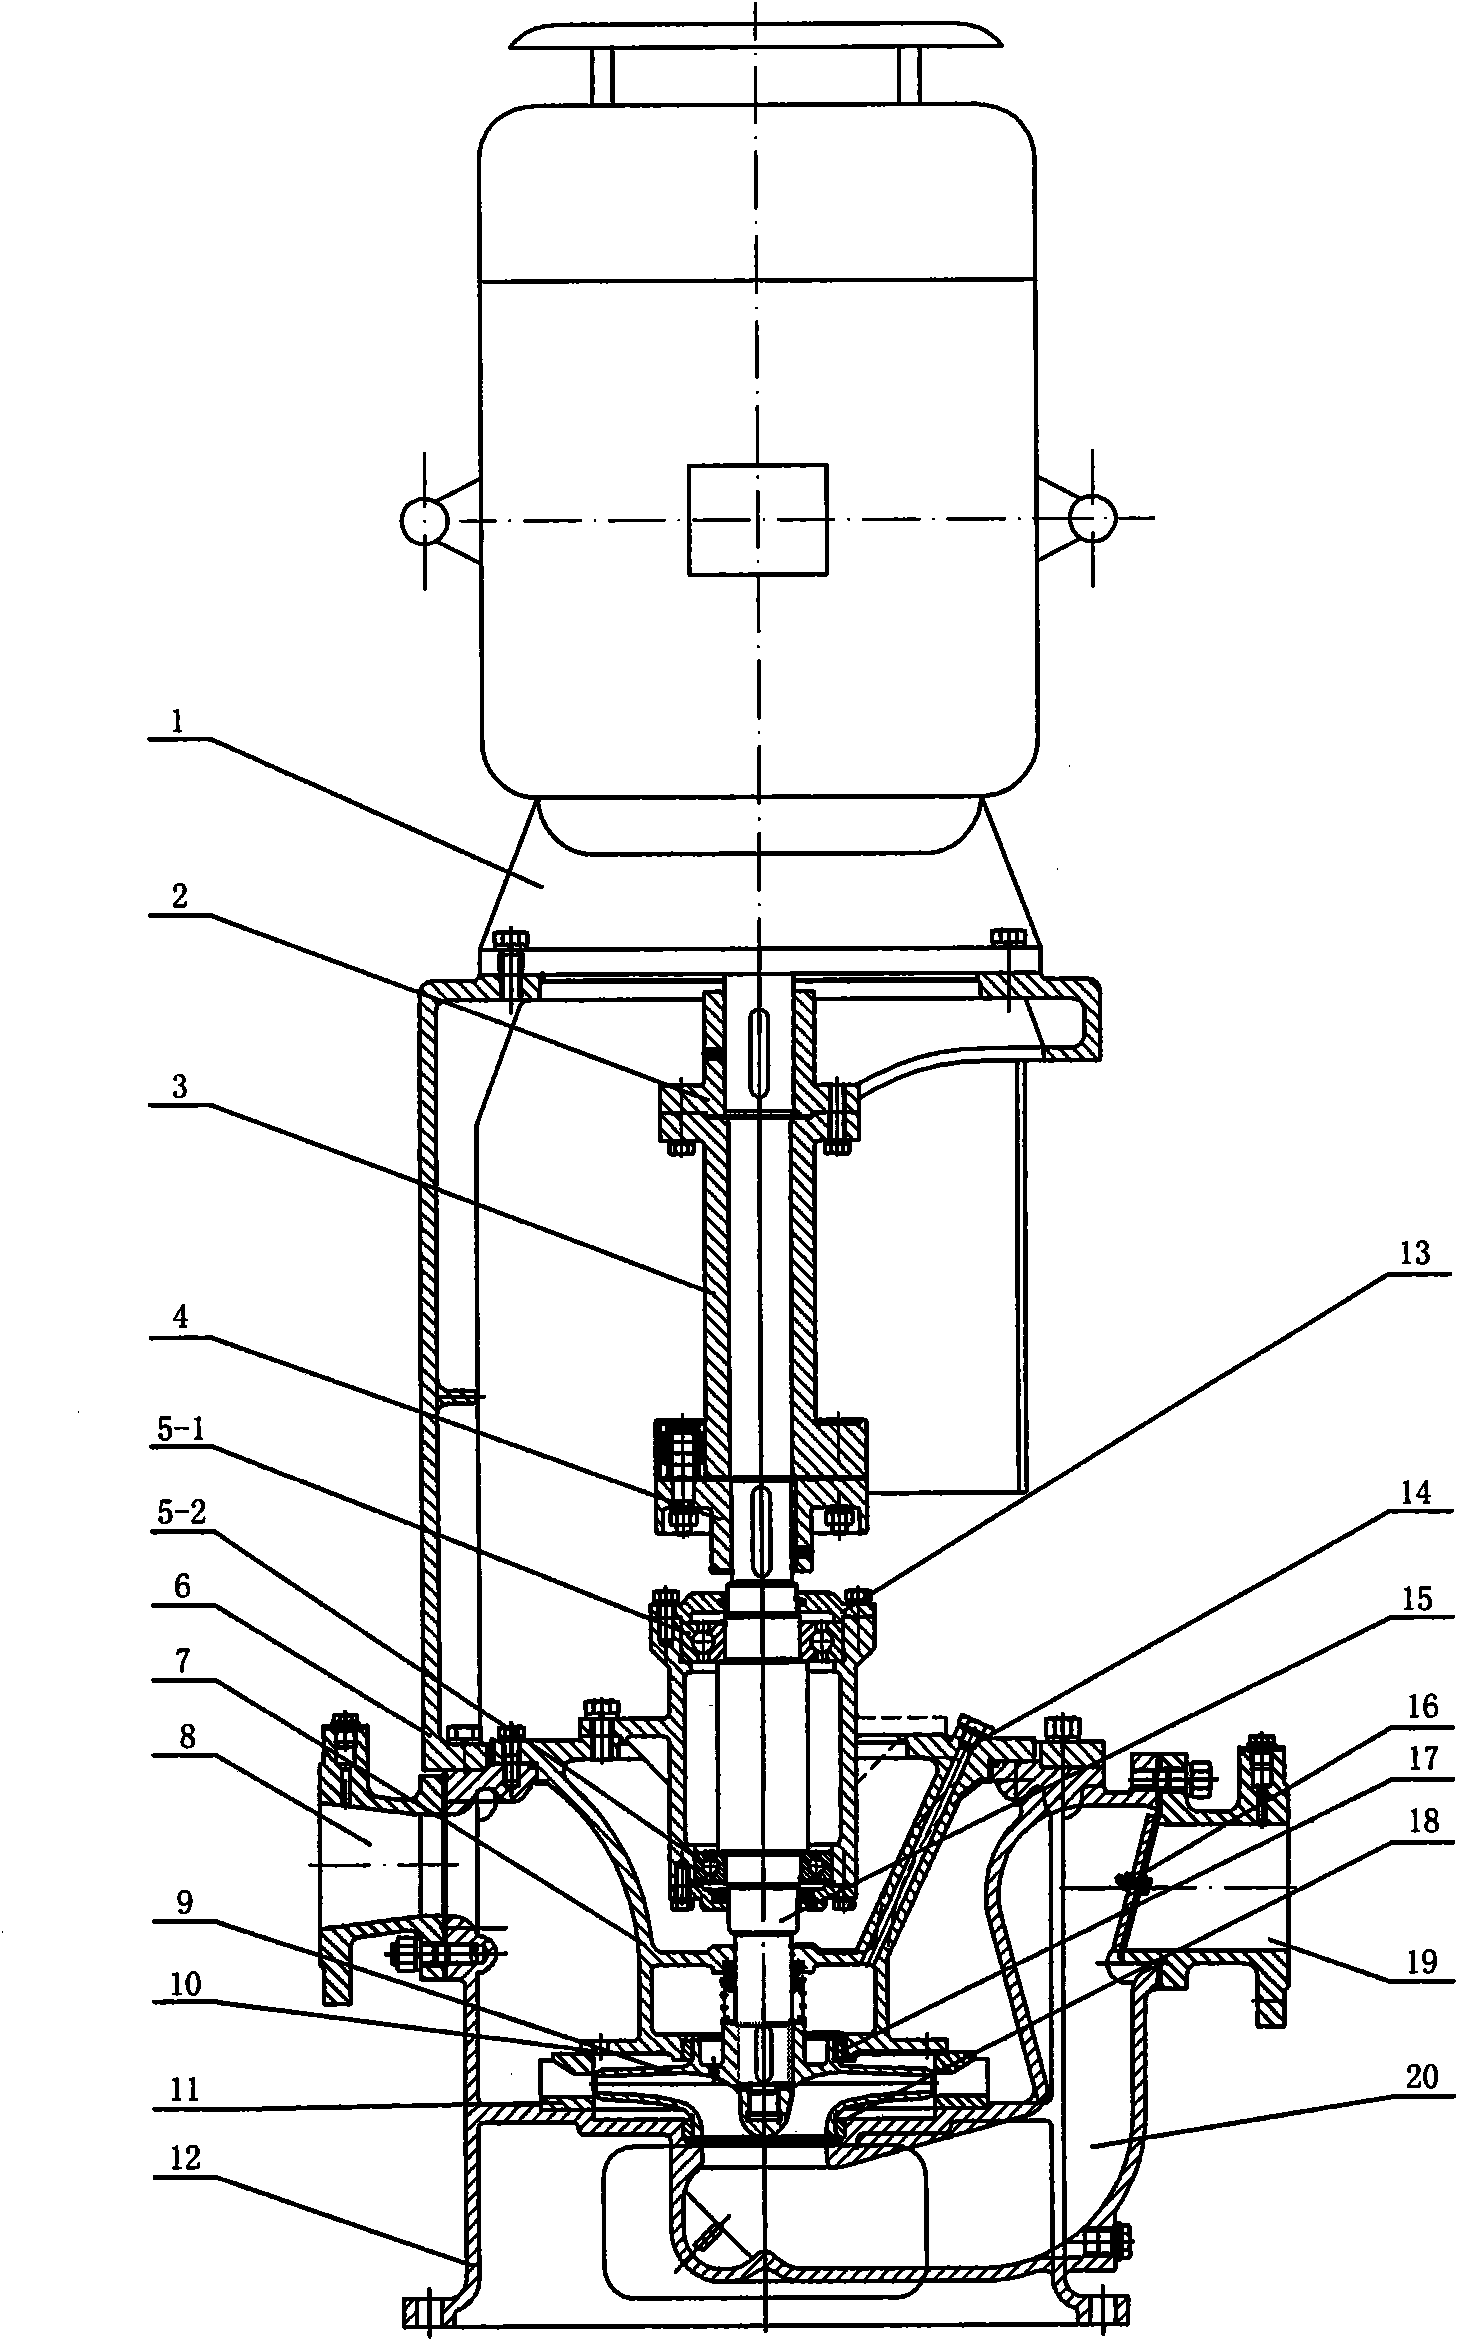 Middle-connecting type vertical self-priming centrifugal pump